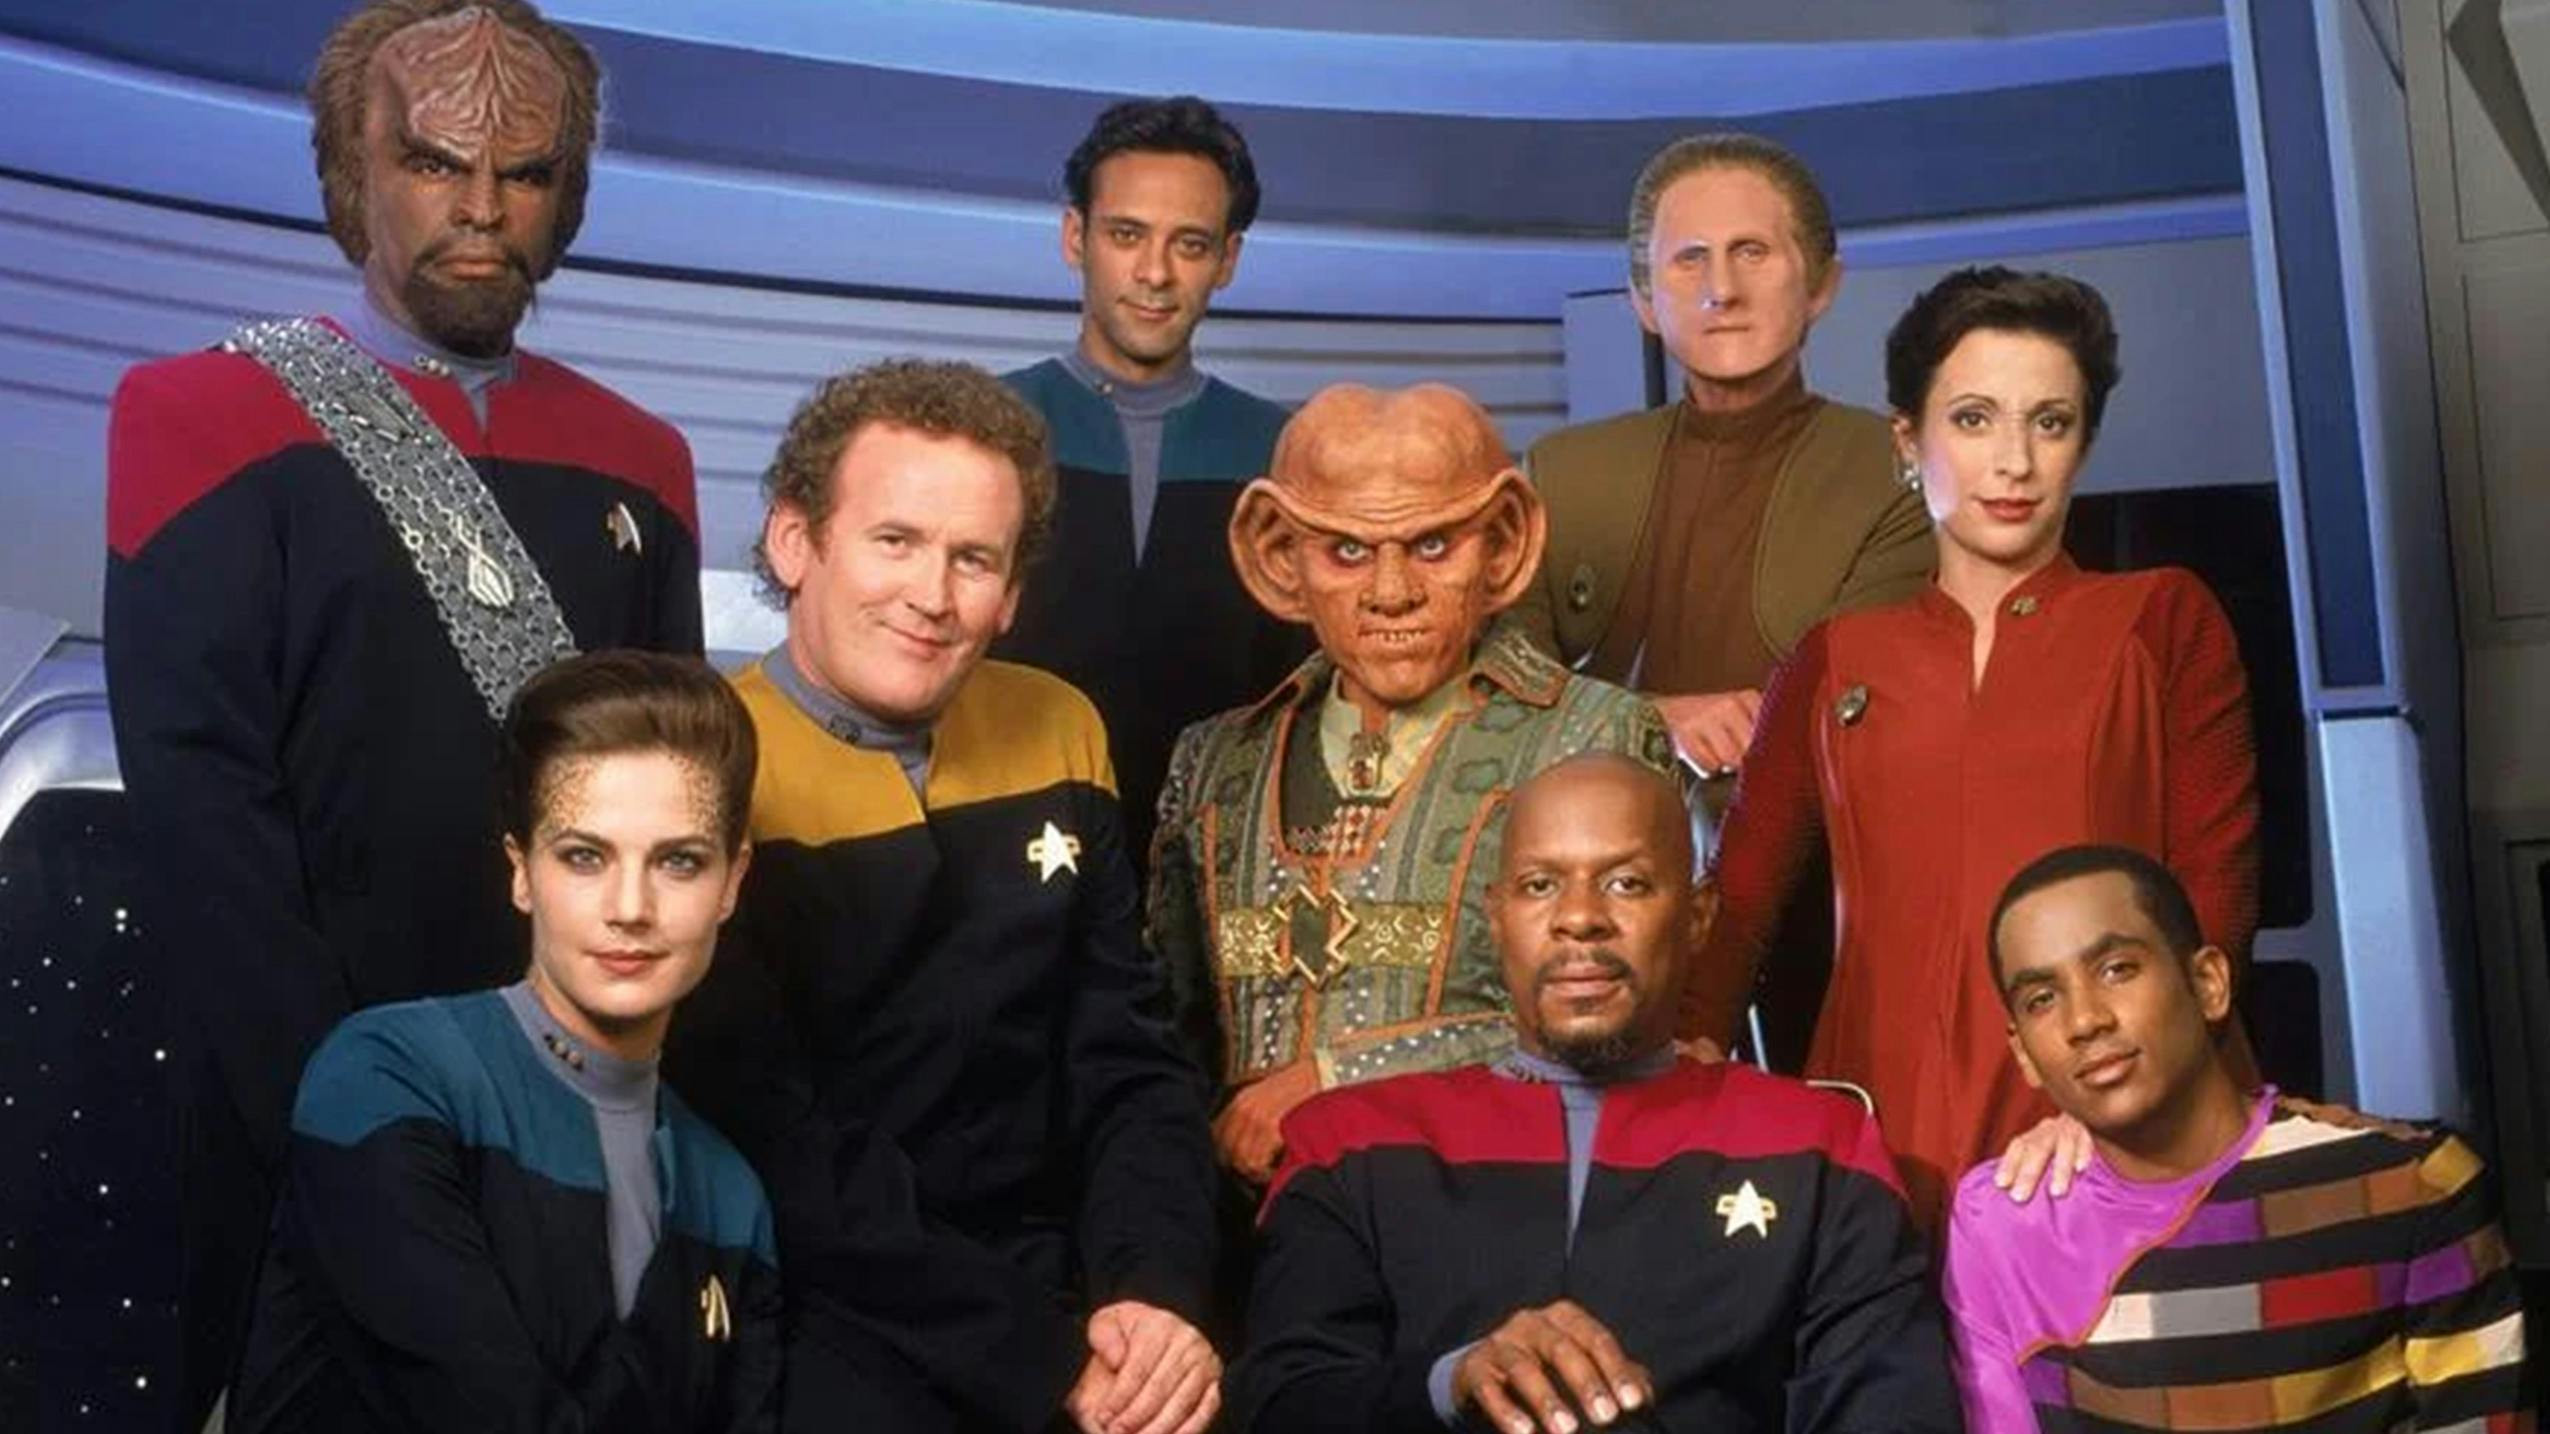 The cast of Star Trek: Deep Space Nine, one of the many shows to stream on Paramount Plus.